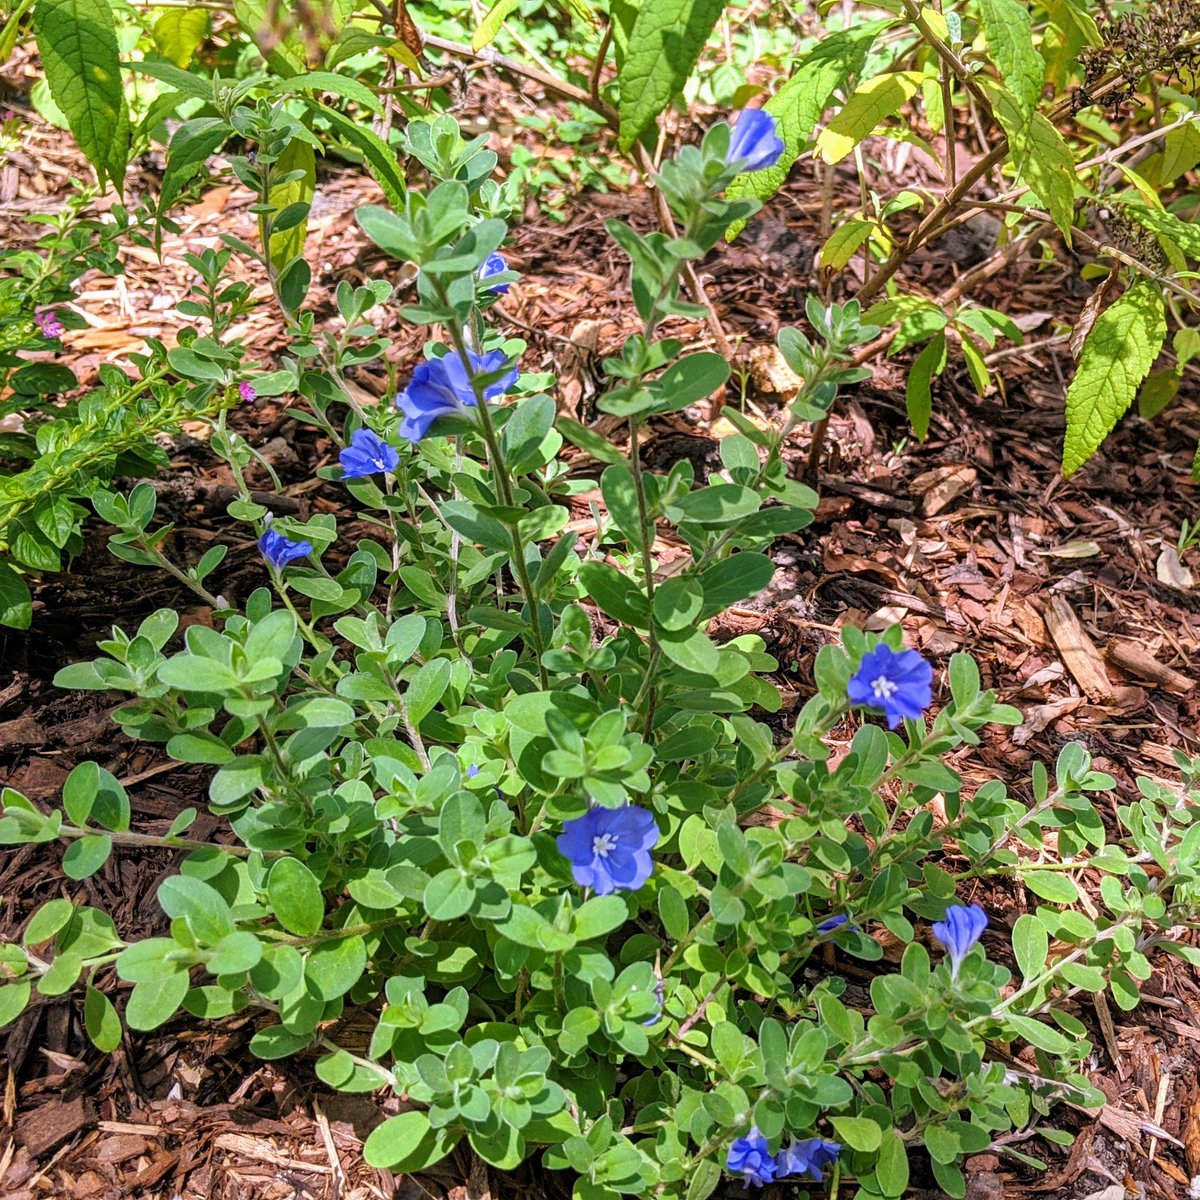 Blue Daze - Evolvulus glomeratusGreat native ground cover. The flowers are the absolute most perfect shade of lapis blue.Not quite as drought tolarent as the other plants.Cheap as dirt. Buy them by the pallet.